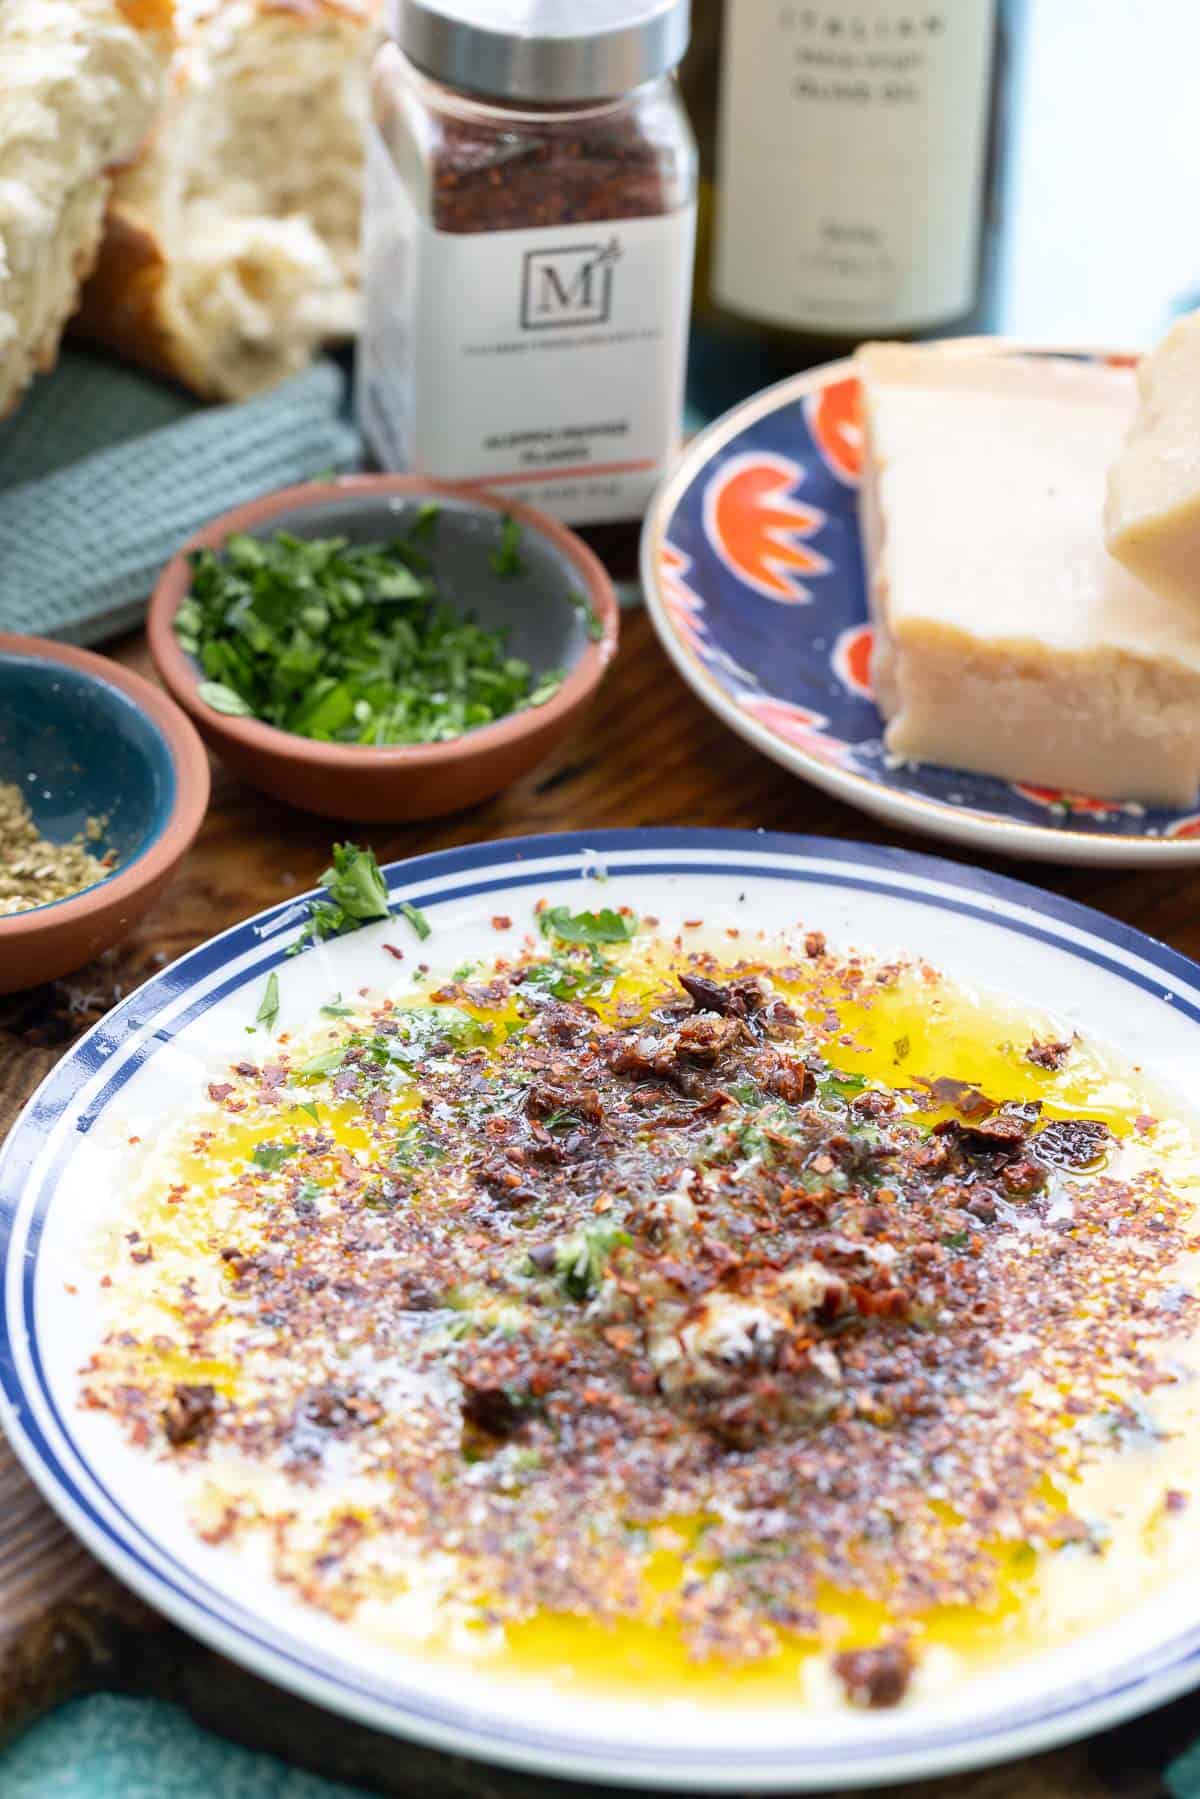 Bread dipping oil on a plate surrounded by small bowls of Italian seasoning and parsley, a wedge of parmesan cheese on a plate, pieces of crusty bread, a bottle of Aleppo pepper and olive oil.